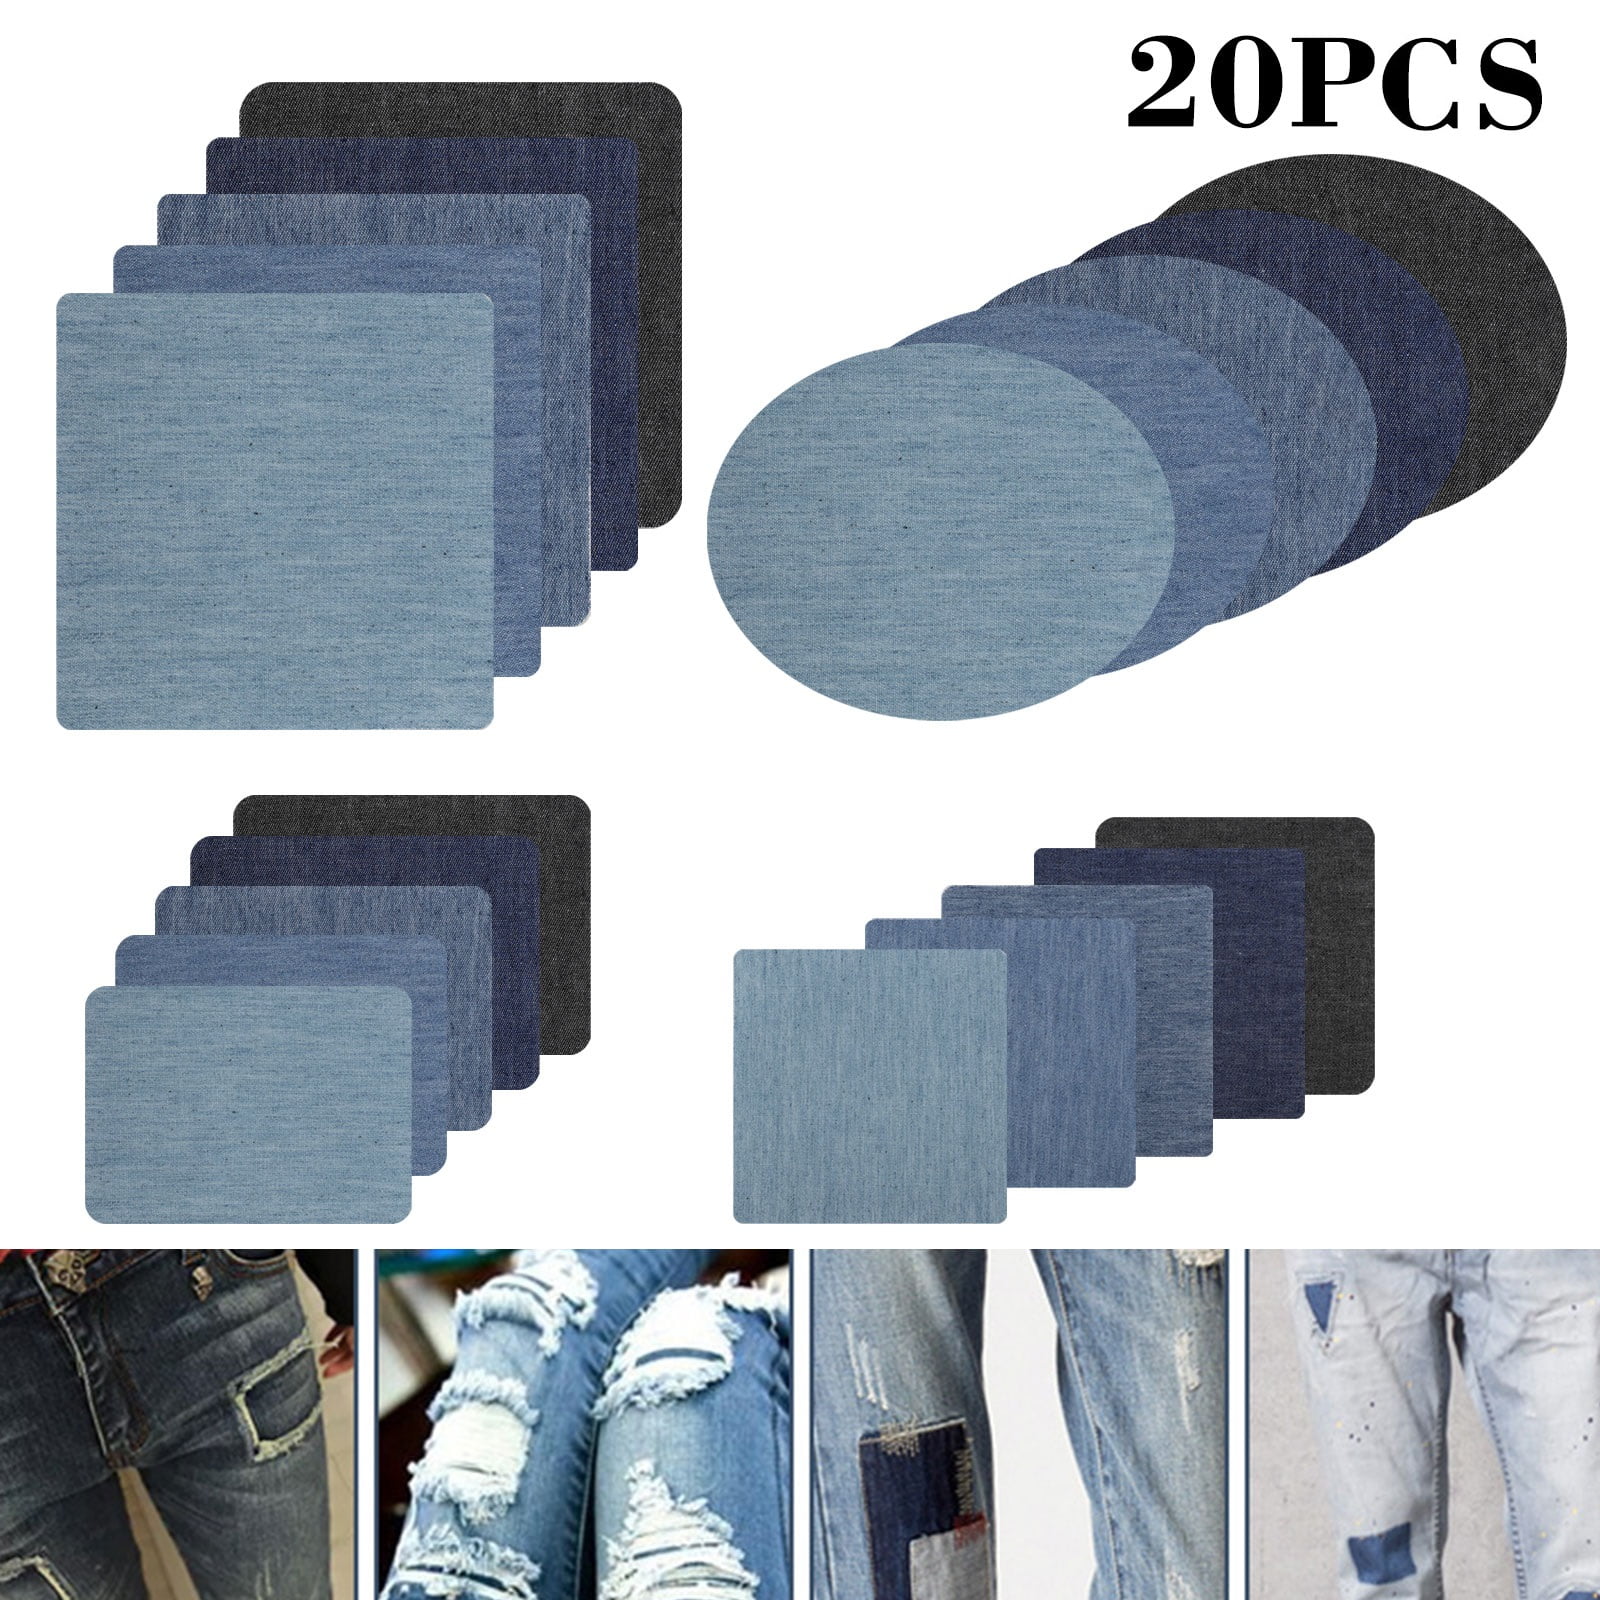 6X Assorted Cotton Jeans Repair Kit 3Color Iron On Denim Patch Sewing Ap Pn 